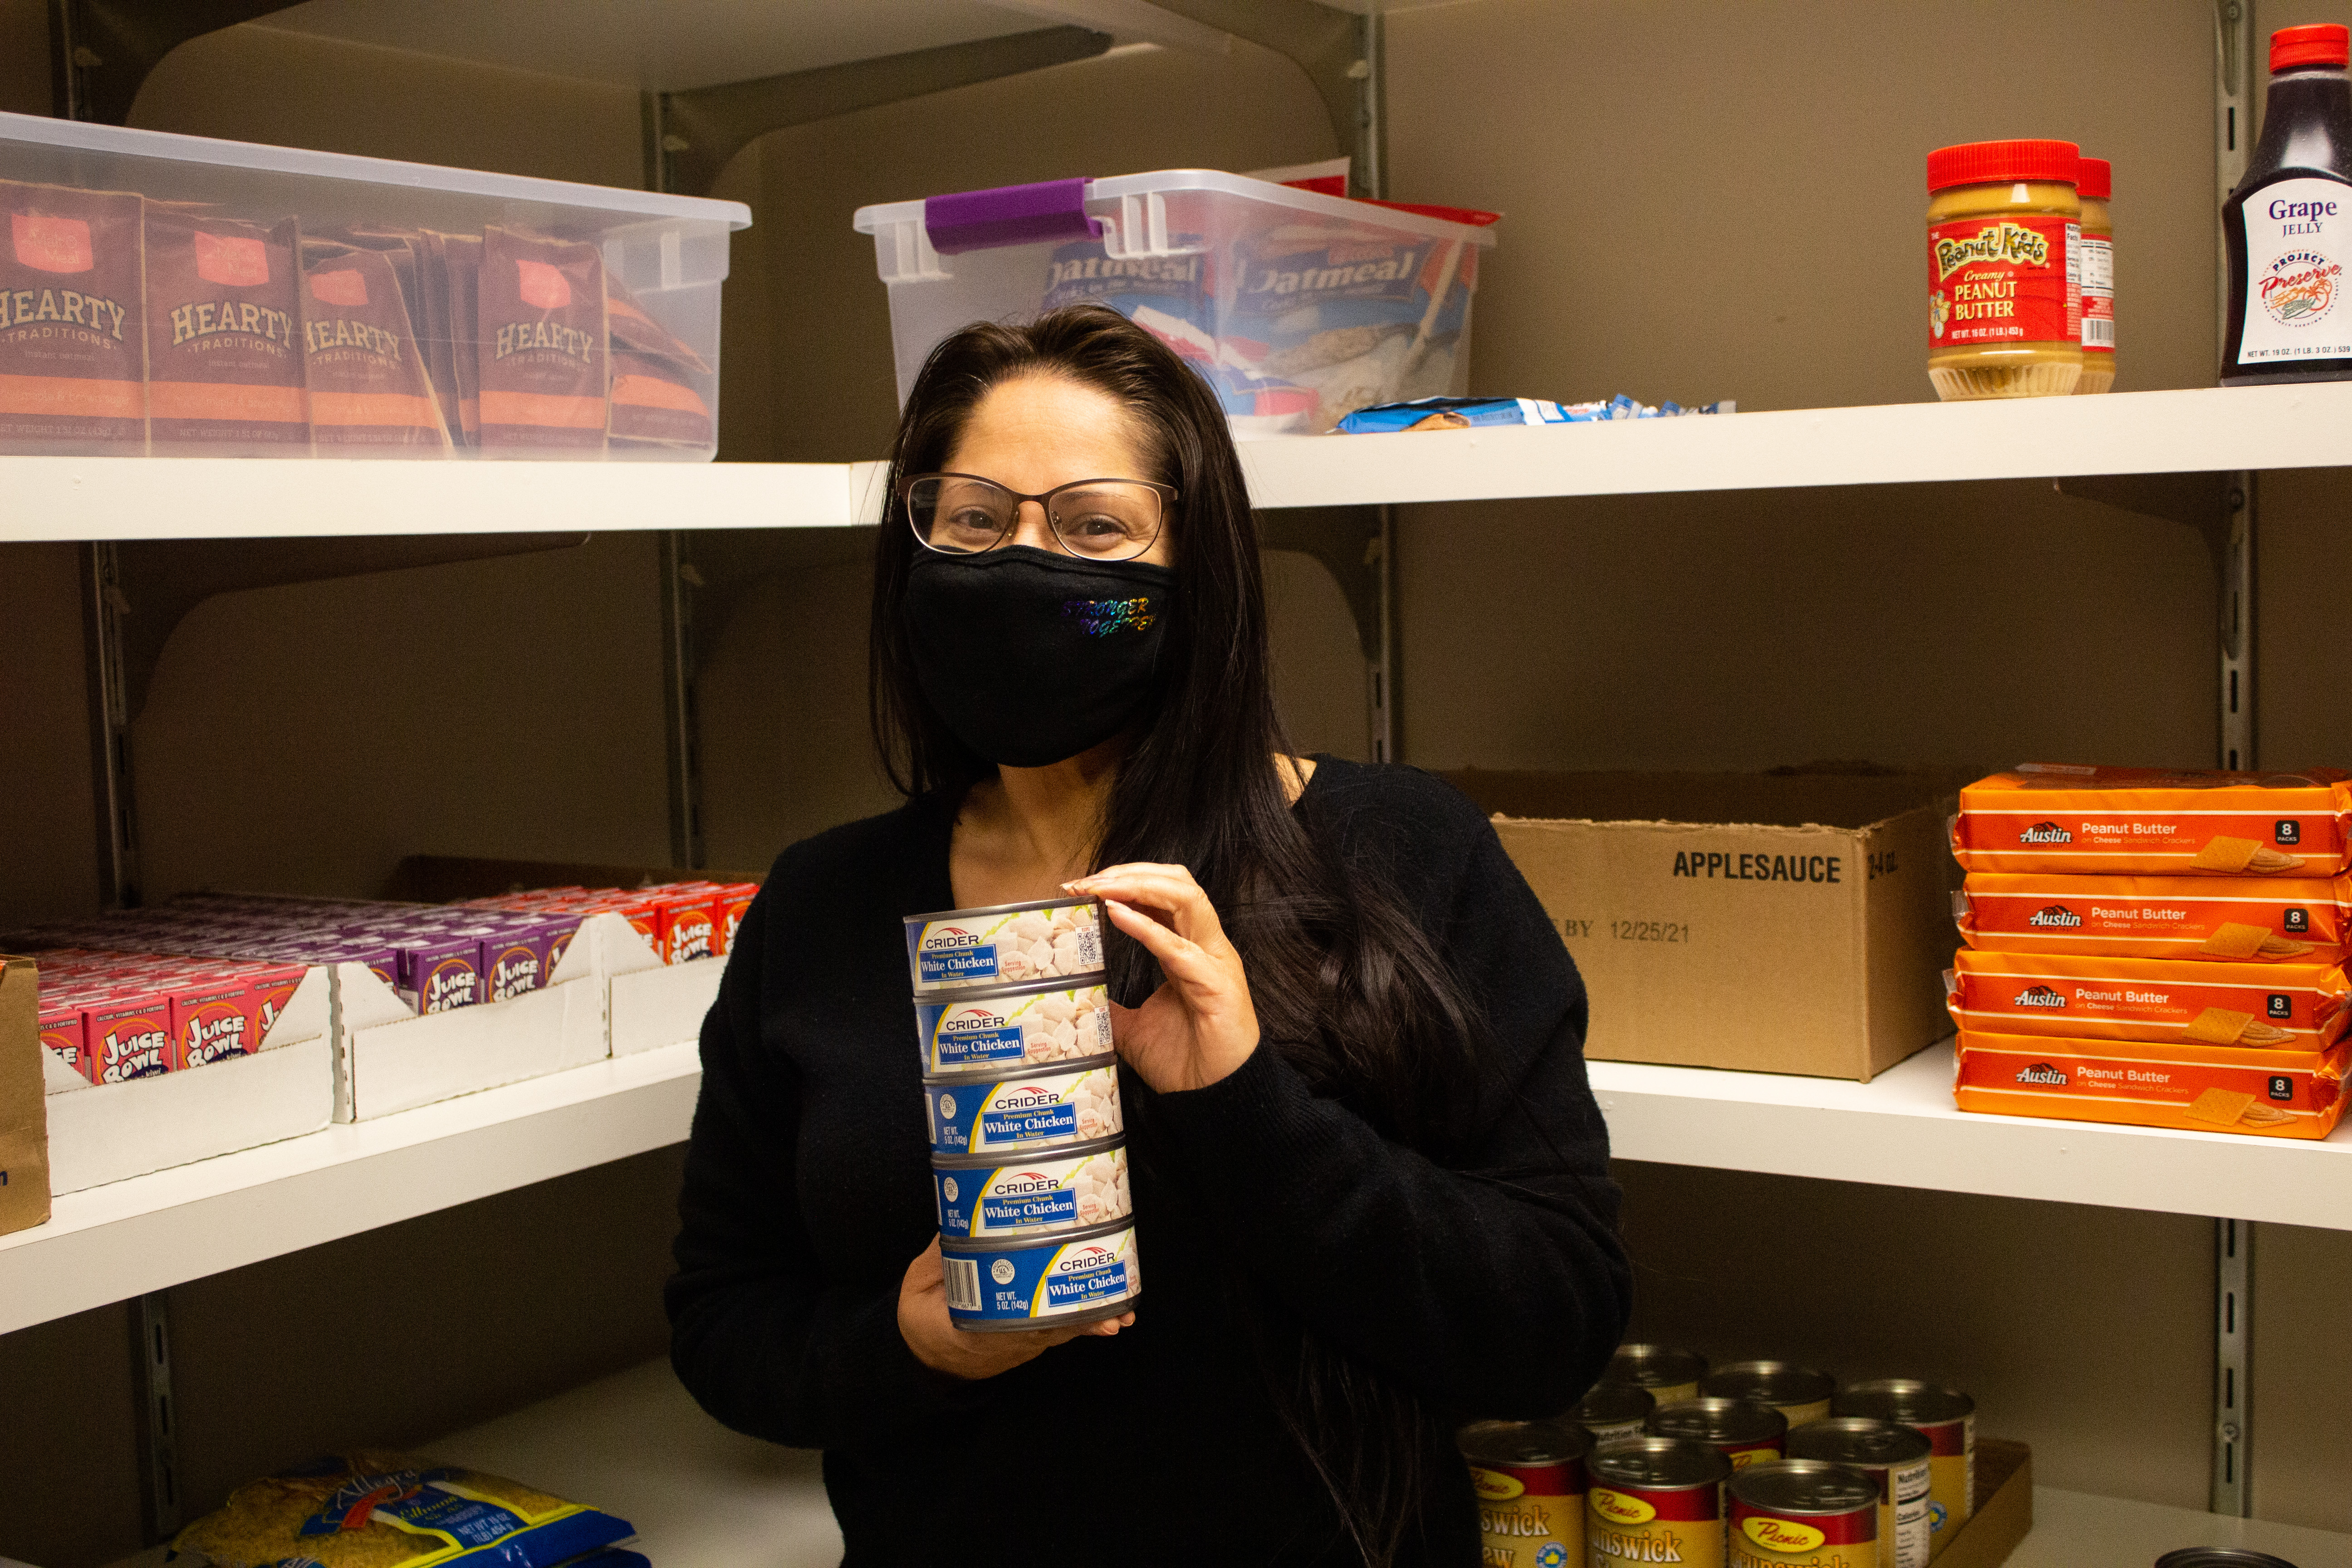 Nashville State Clarksville Campus offers food assistance, via the Campus Cupboards, for students in need